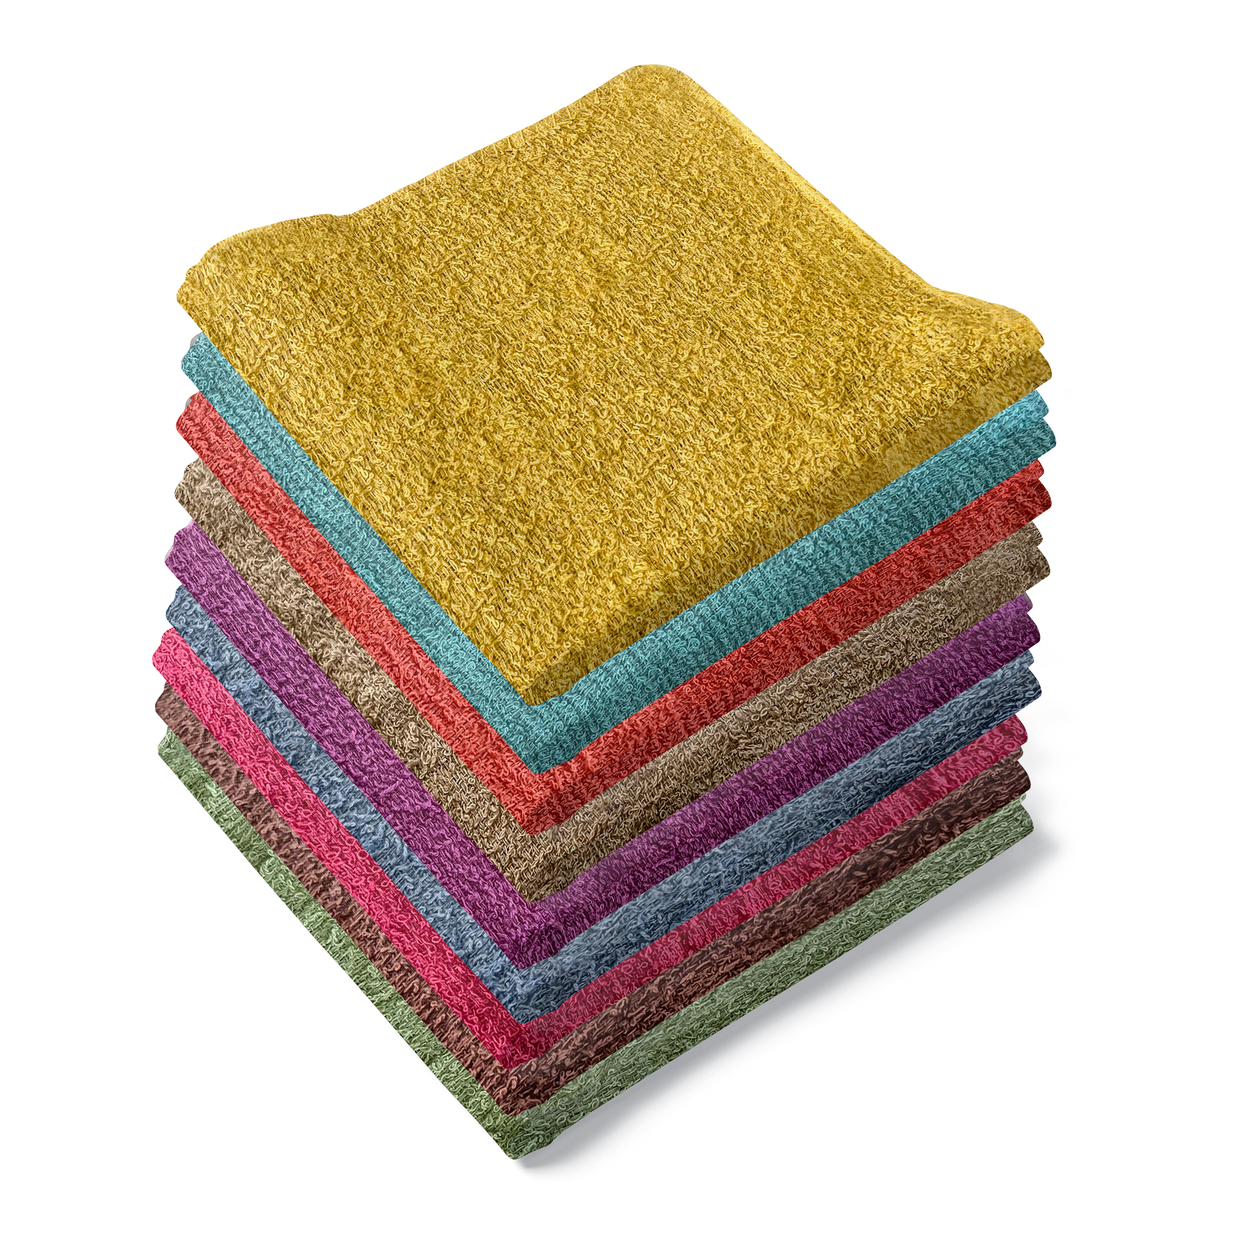 Multi-Pack: 100% Ultra-Soft Absorbent Cotton Multipurpose Cleaning Wash Cloths - 24-pack